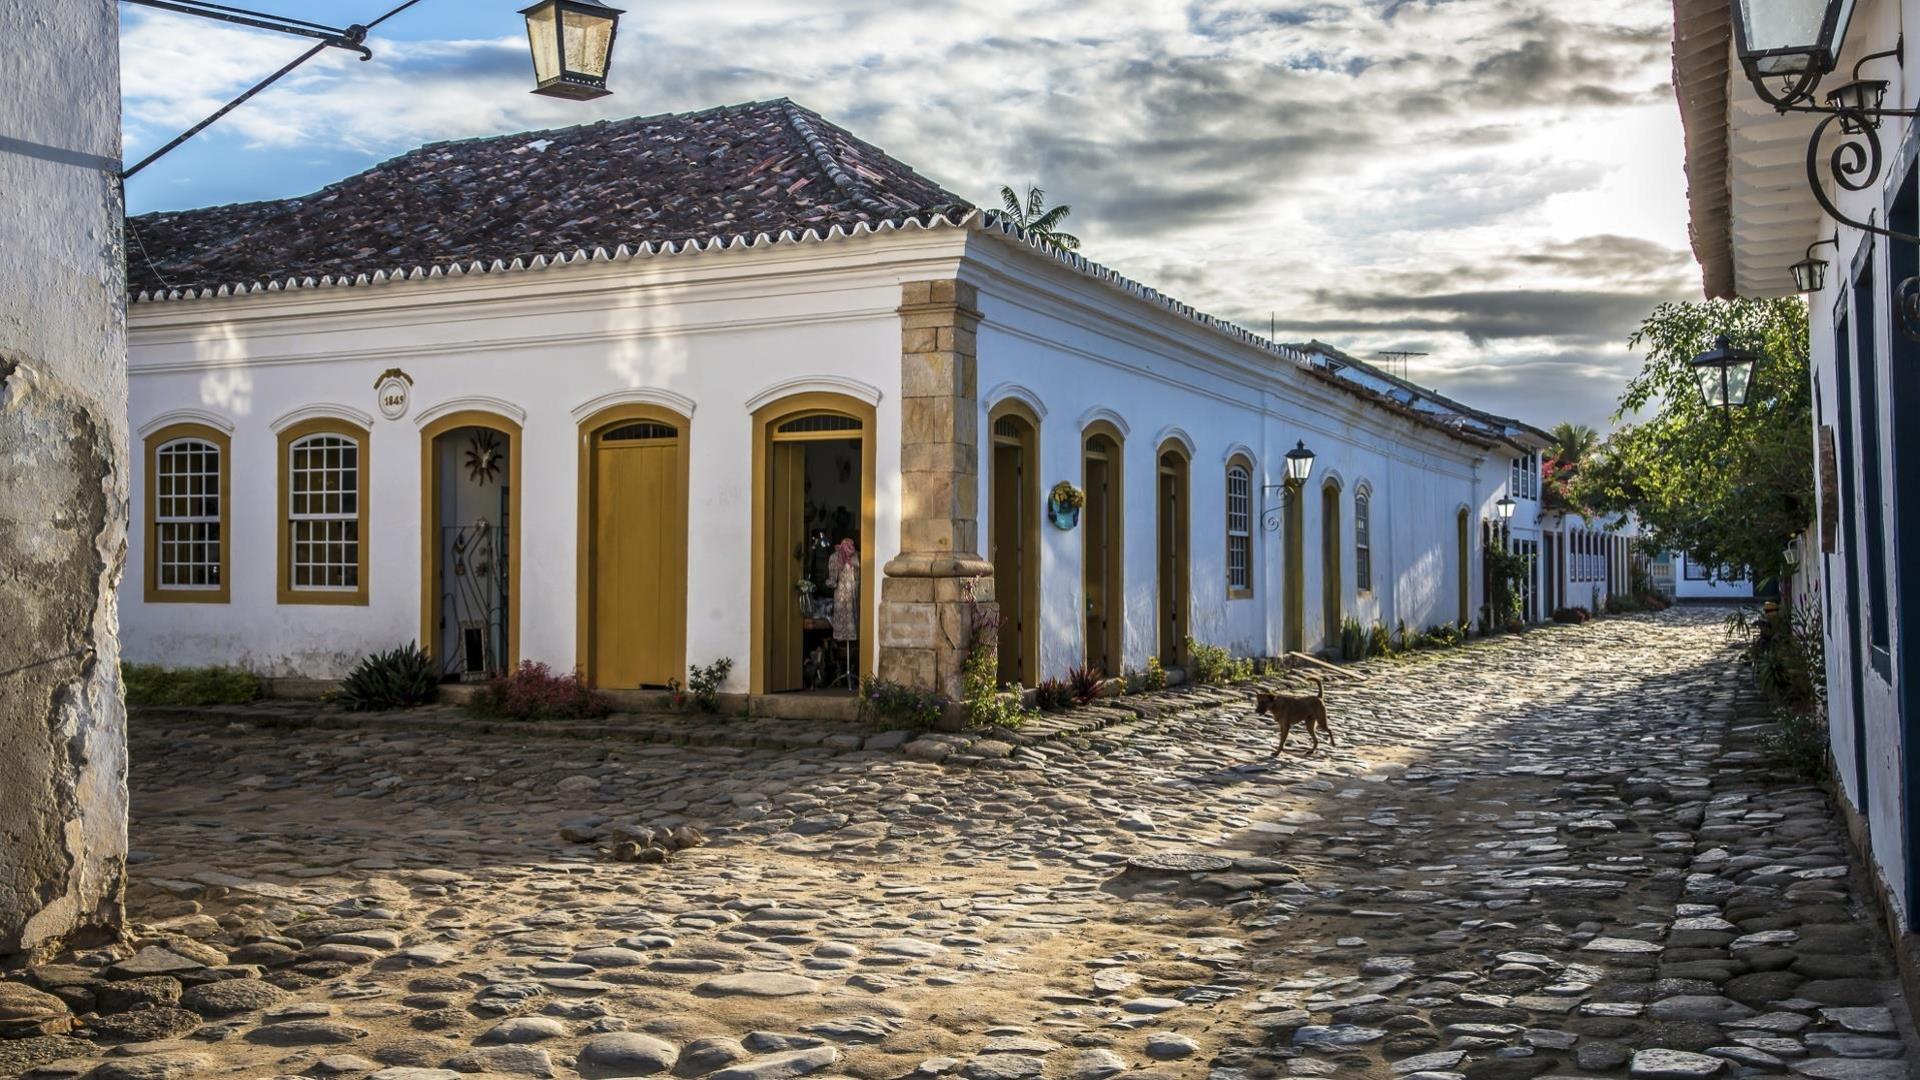 Beautiful colonial buildings and cobble stone pavements in Paraty, Brazil